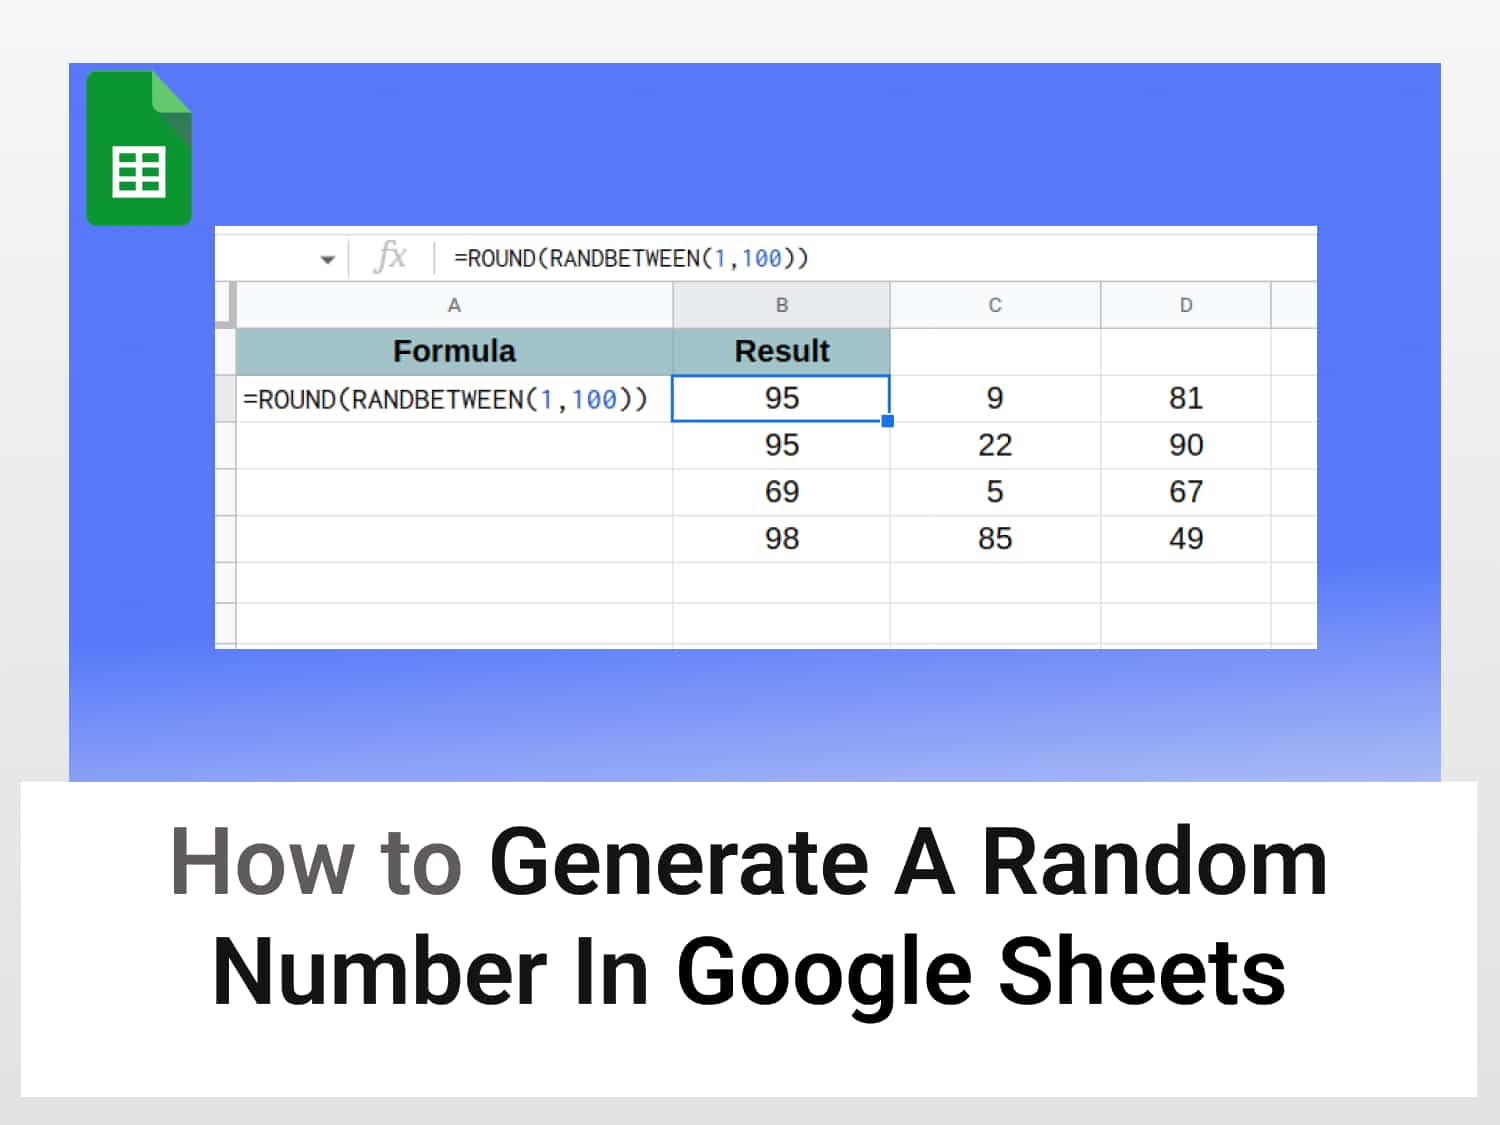 Generate a random number in Google Sheets